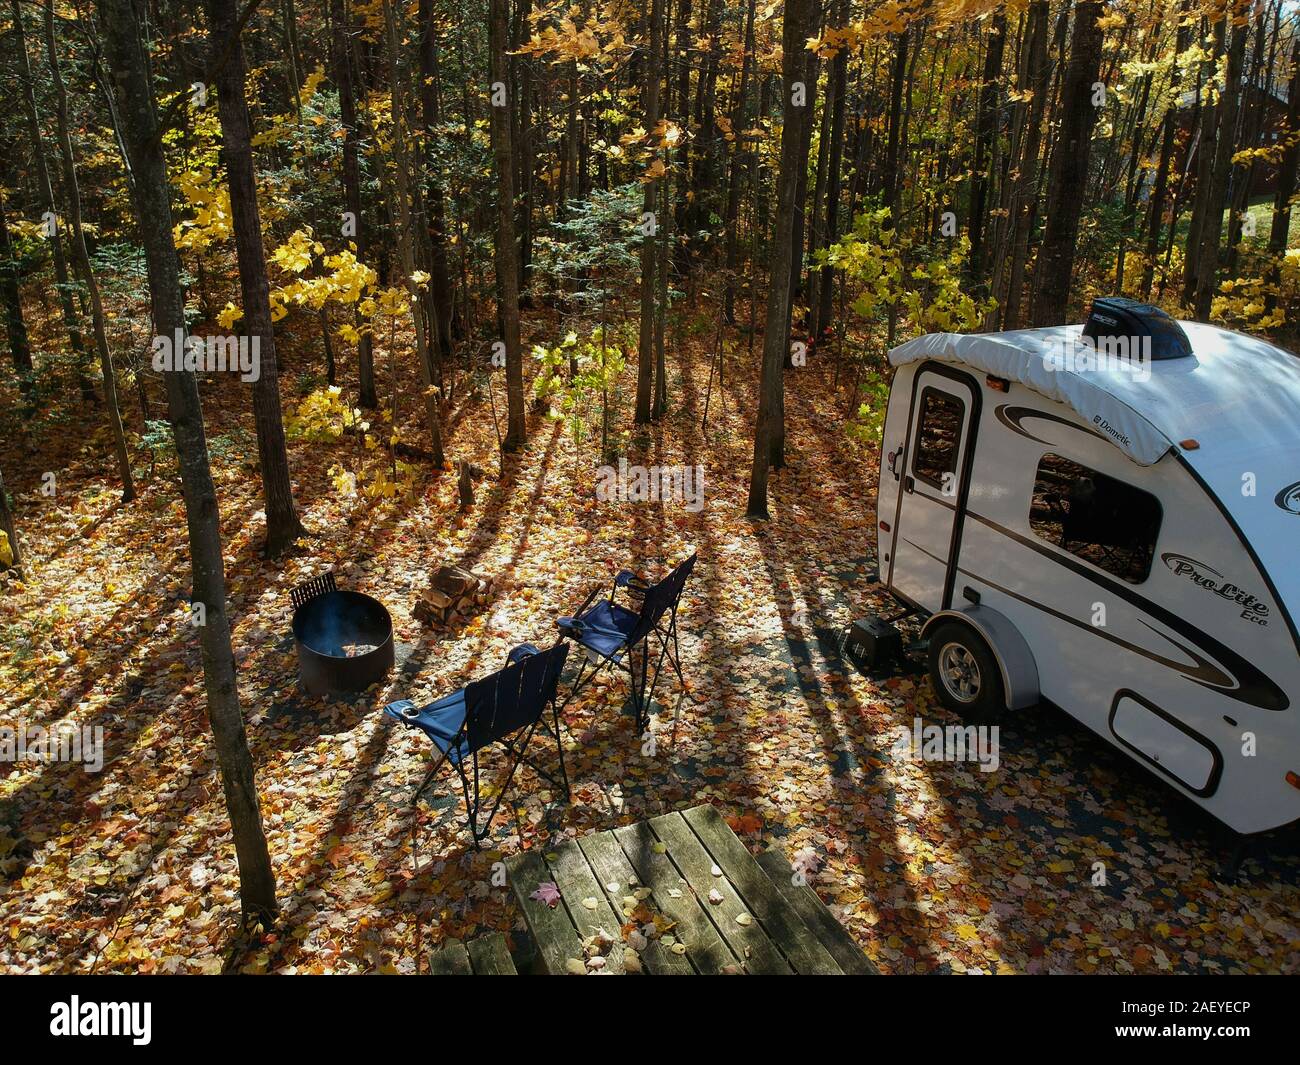 October 15, 2019 - Centre-du-Québec, Canada: Aerial view of a Prolite Travel trailer on campsite surrounded by Autumn foliage, Canadian RVing Stock Photo